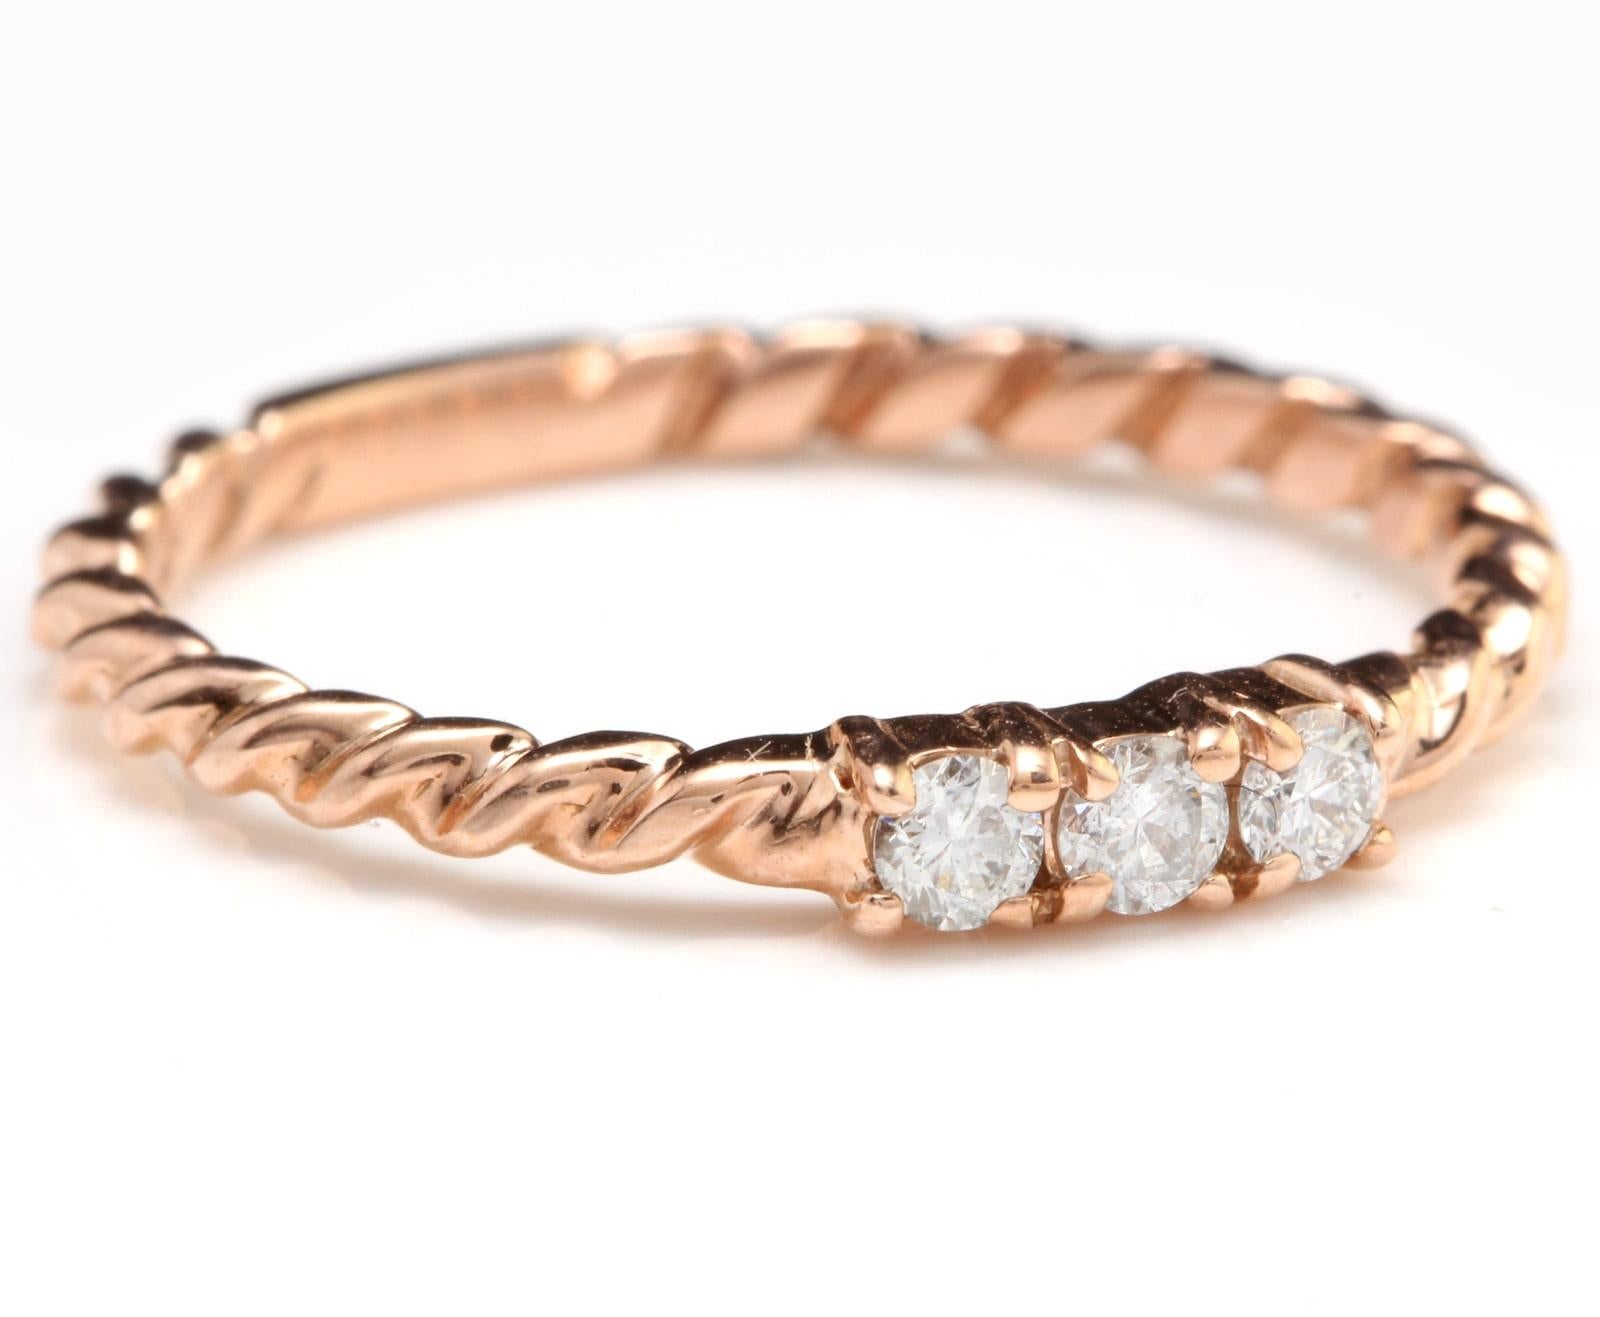 Splendid .15 Carats Natural Diamond 14K Solid Rose Gold Ring

Suggested Replacement Value: Approx. $1,400.00

Stamped: 14K

Total Natural Round Cut Diamonds Weight: Approx. 0.15 Carats (color G-H / Clarity SI1-SI2)

The width of the ring is: